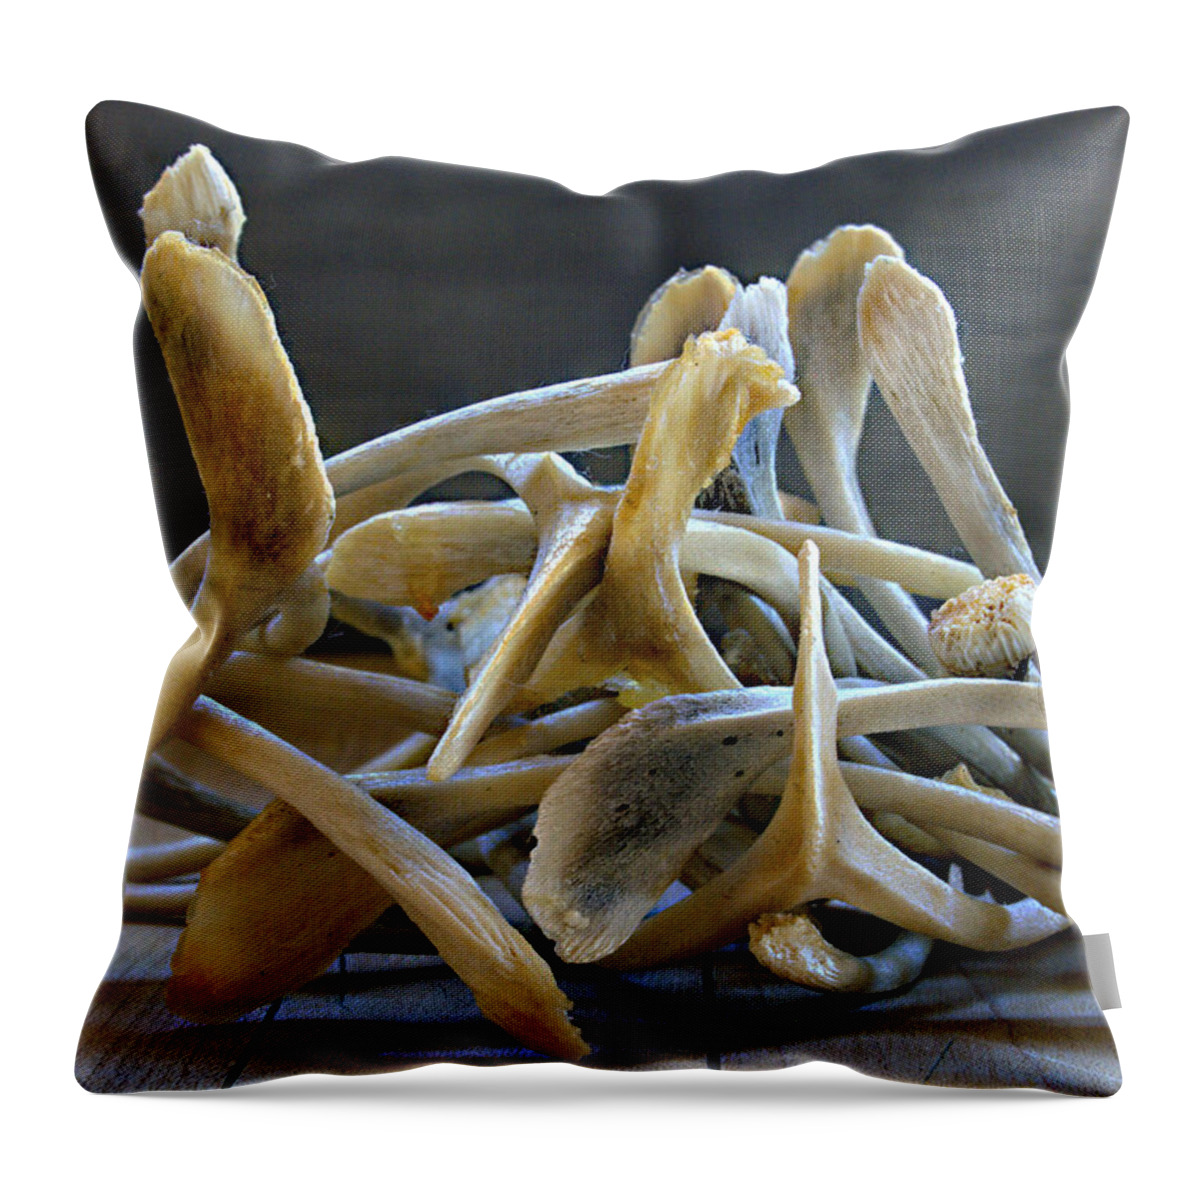 Wishes Throw Pillow featuring the photograph Your Wishes Await by Joe Schofield